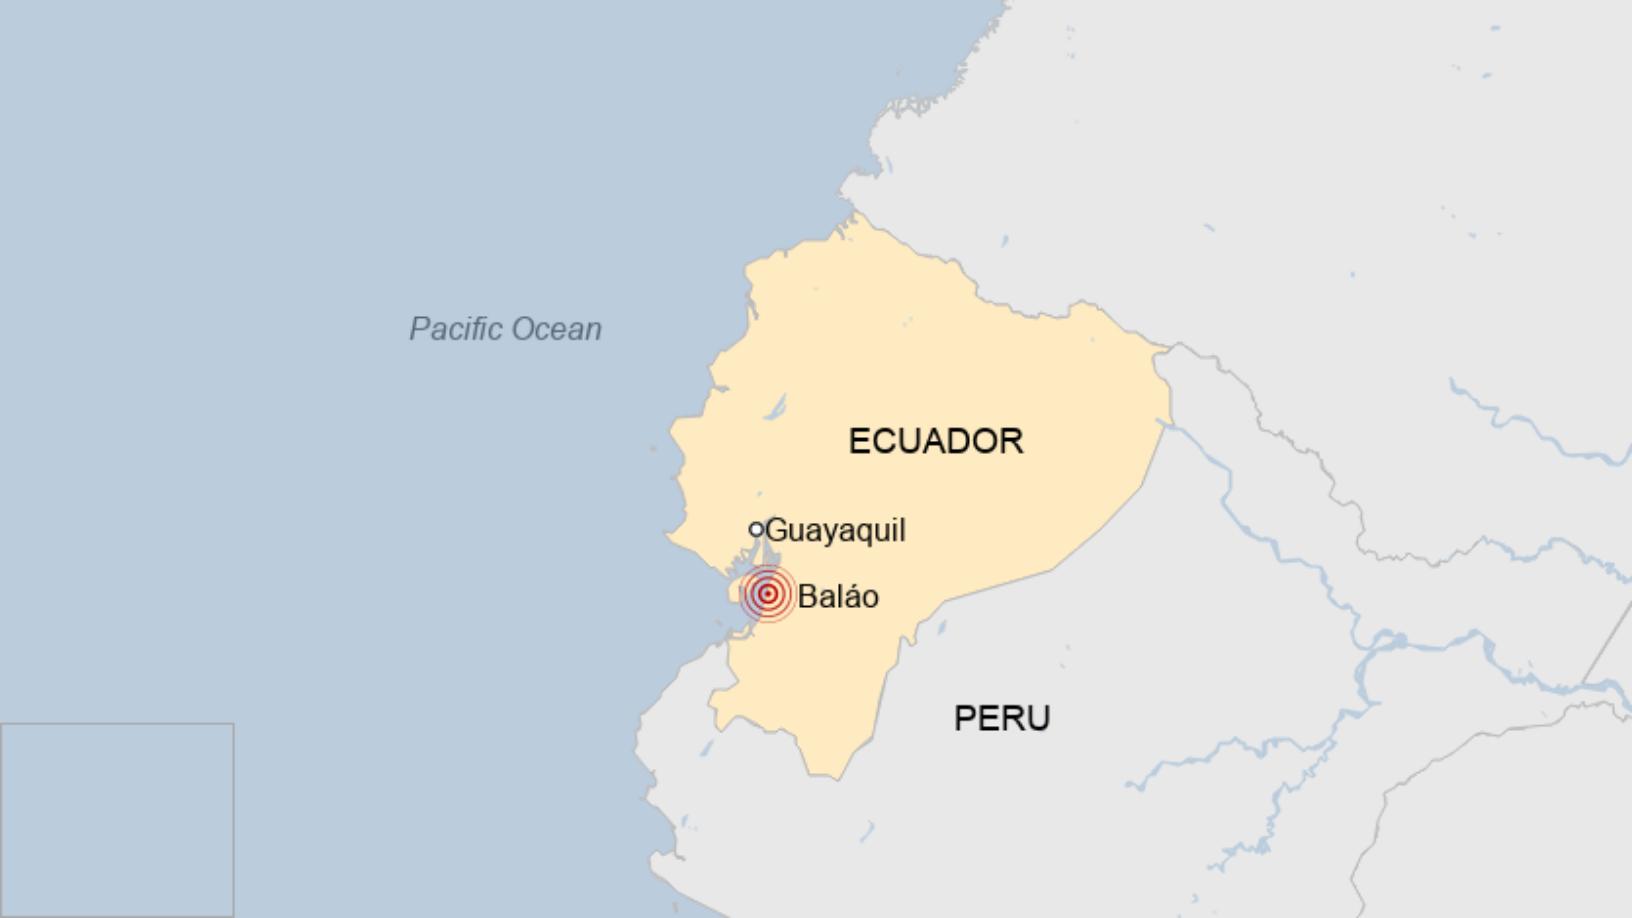  Map of Ecuador showing determination  of the earthquake adjacent   Balao, astir   50 miles southbound  of the metropolis  of Guayaquil.